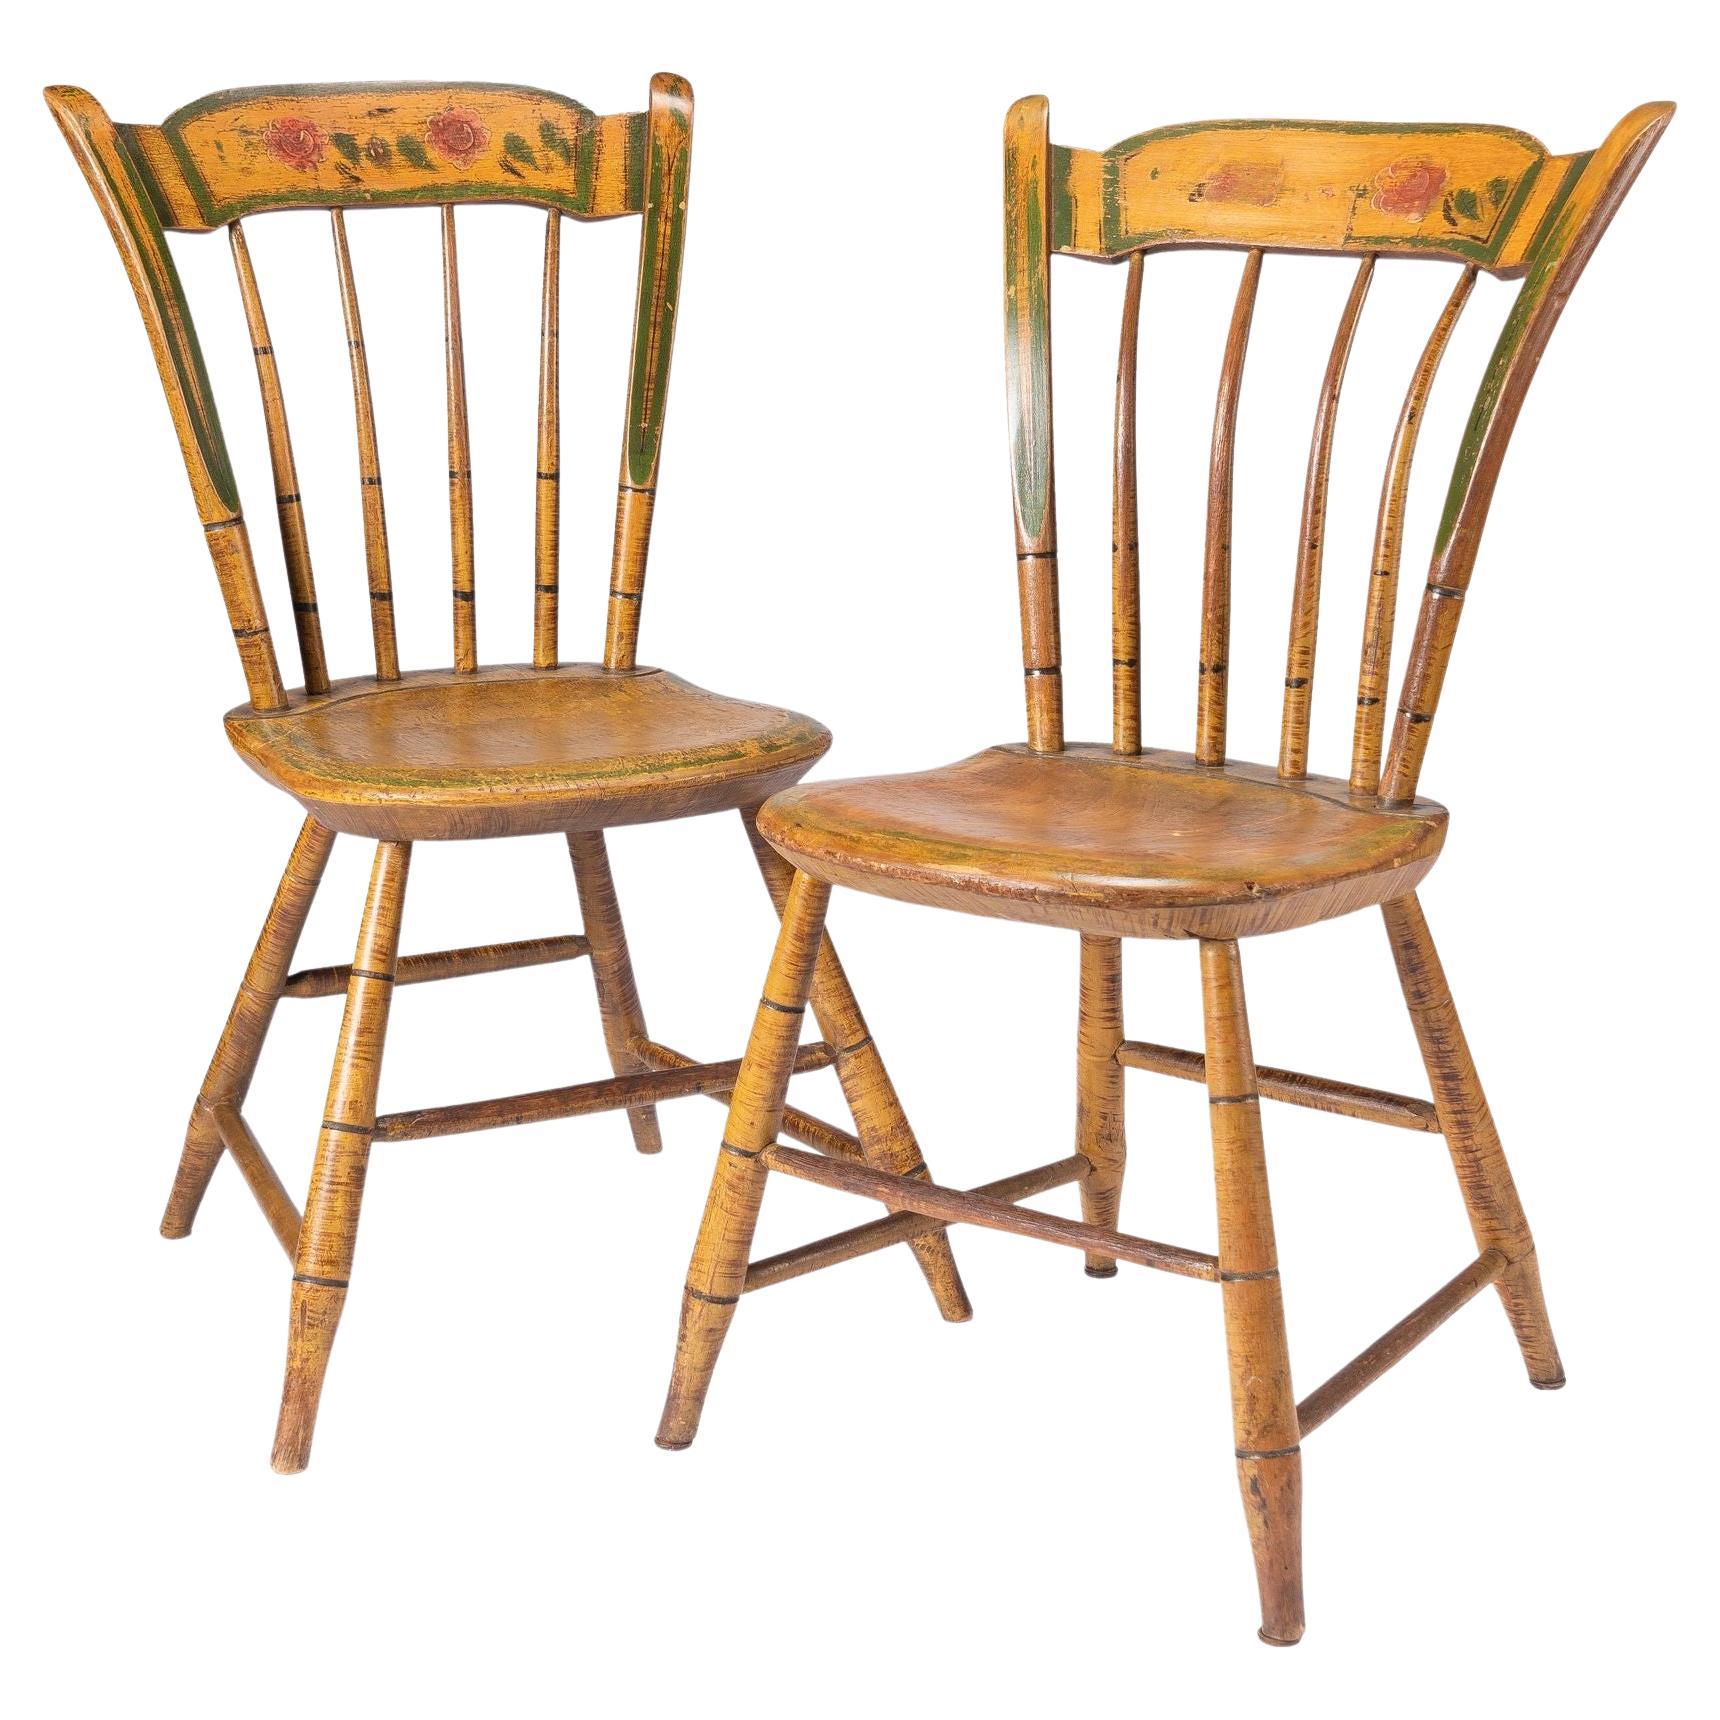 Pair of New England Painted Windsor Side Chairs, 1830-40 For Sale